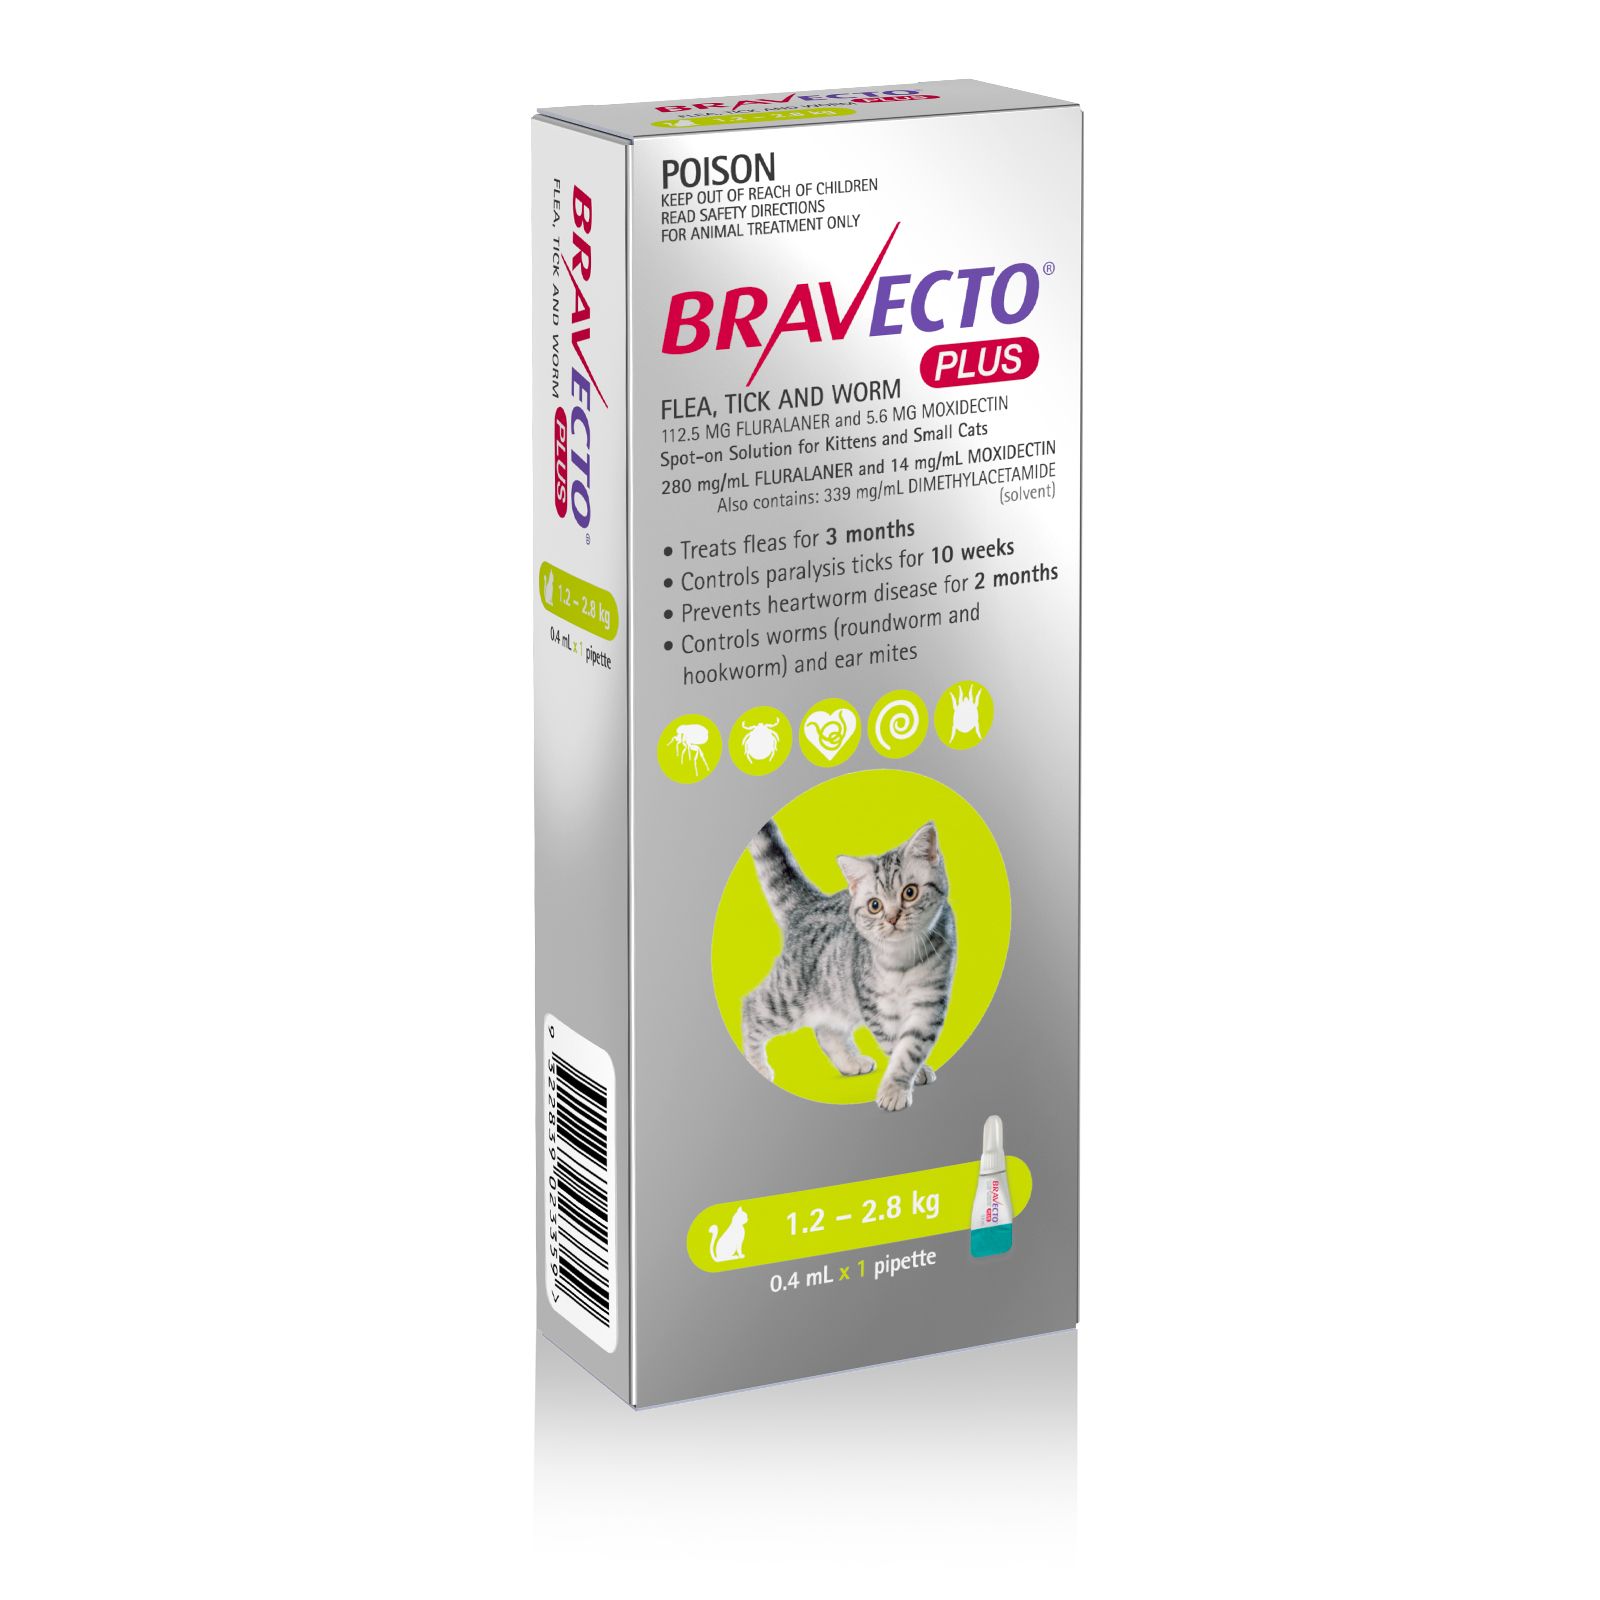 Bravecto Plus For Kittens & Small Cats 1.2 - 2.8kg 0.4mL x 1 Pipette 